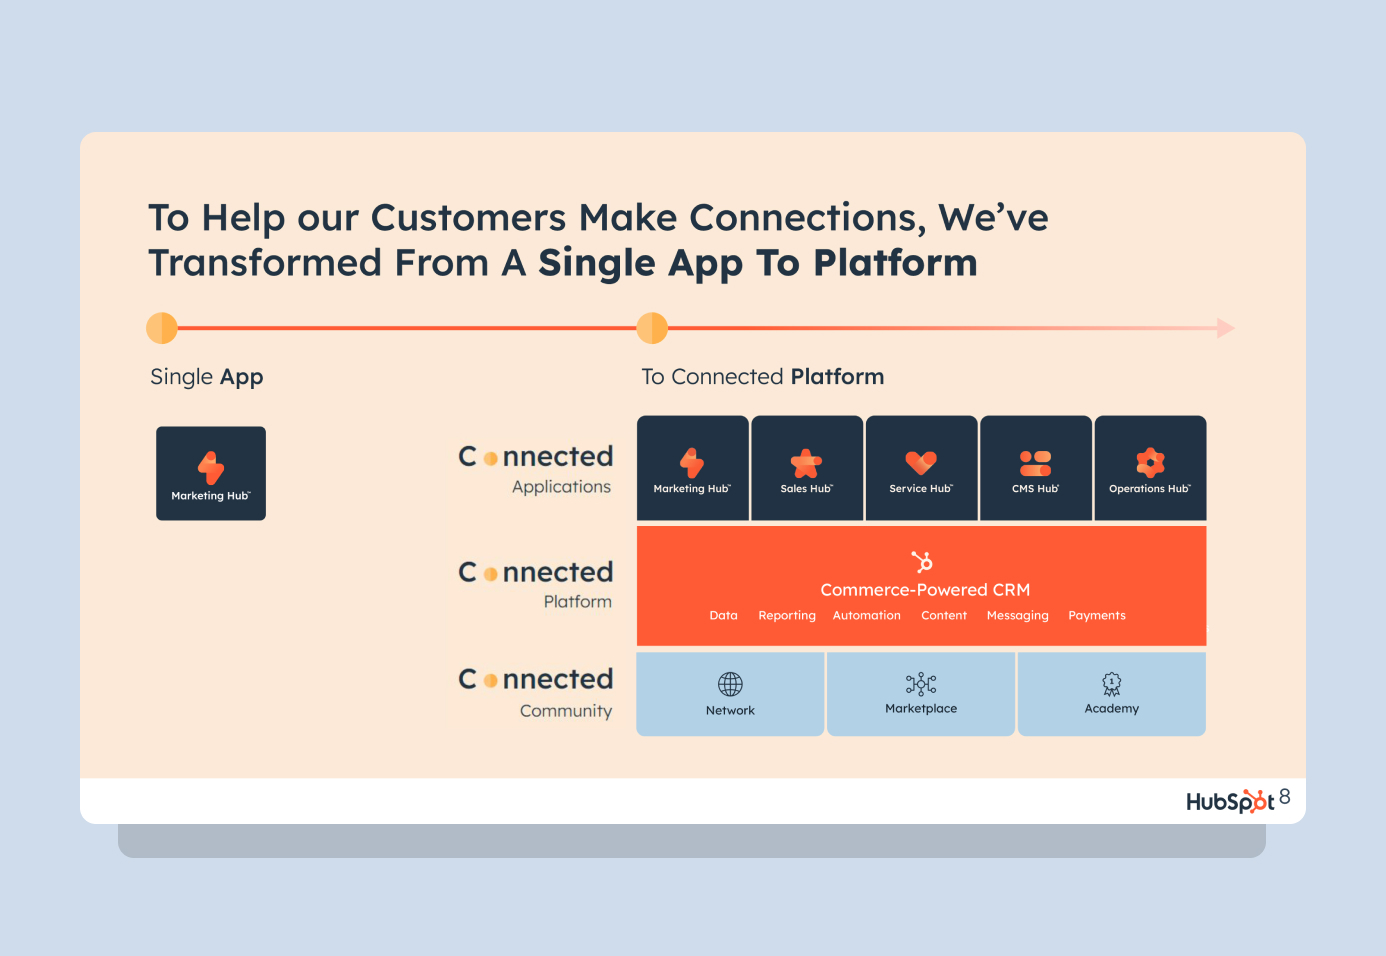 To help our customers make connections, we've transformed from a single app to platform